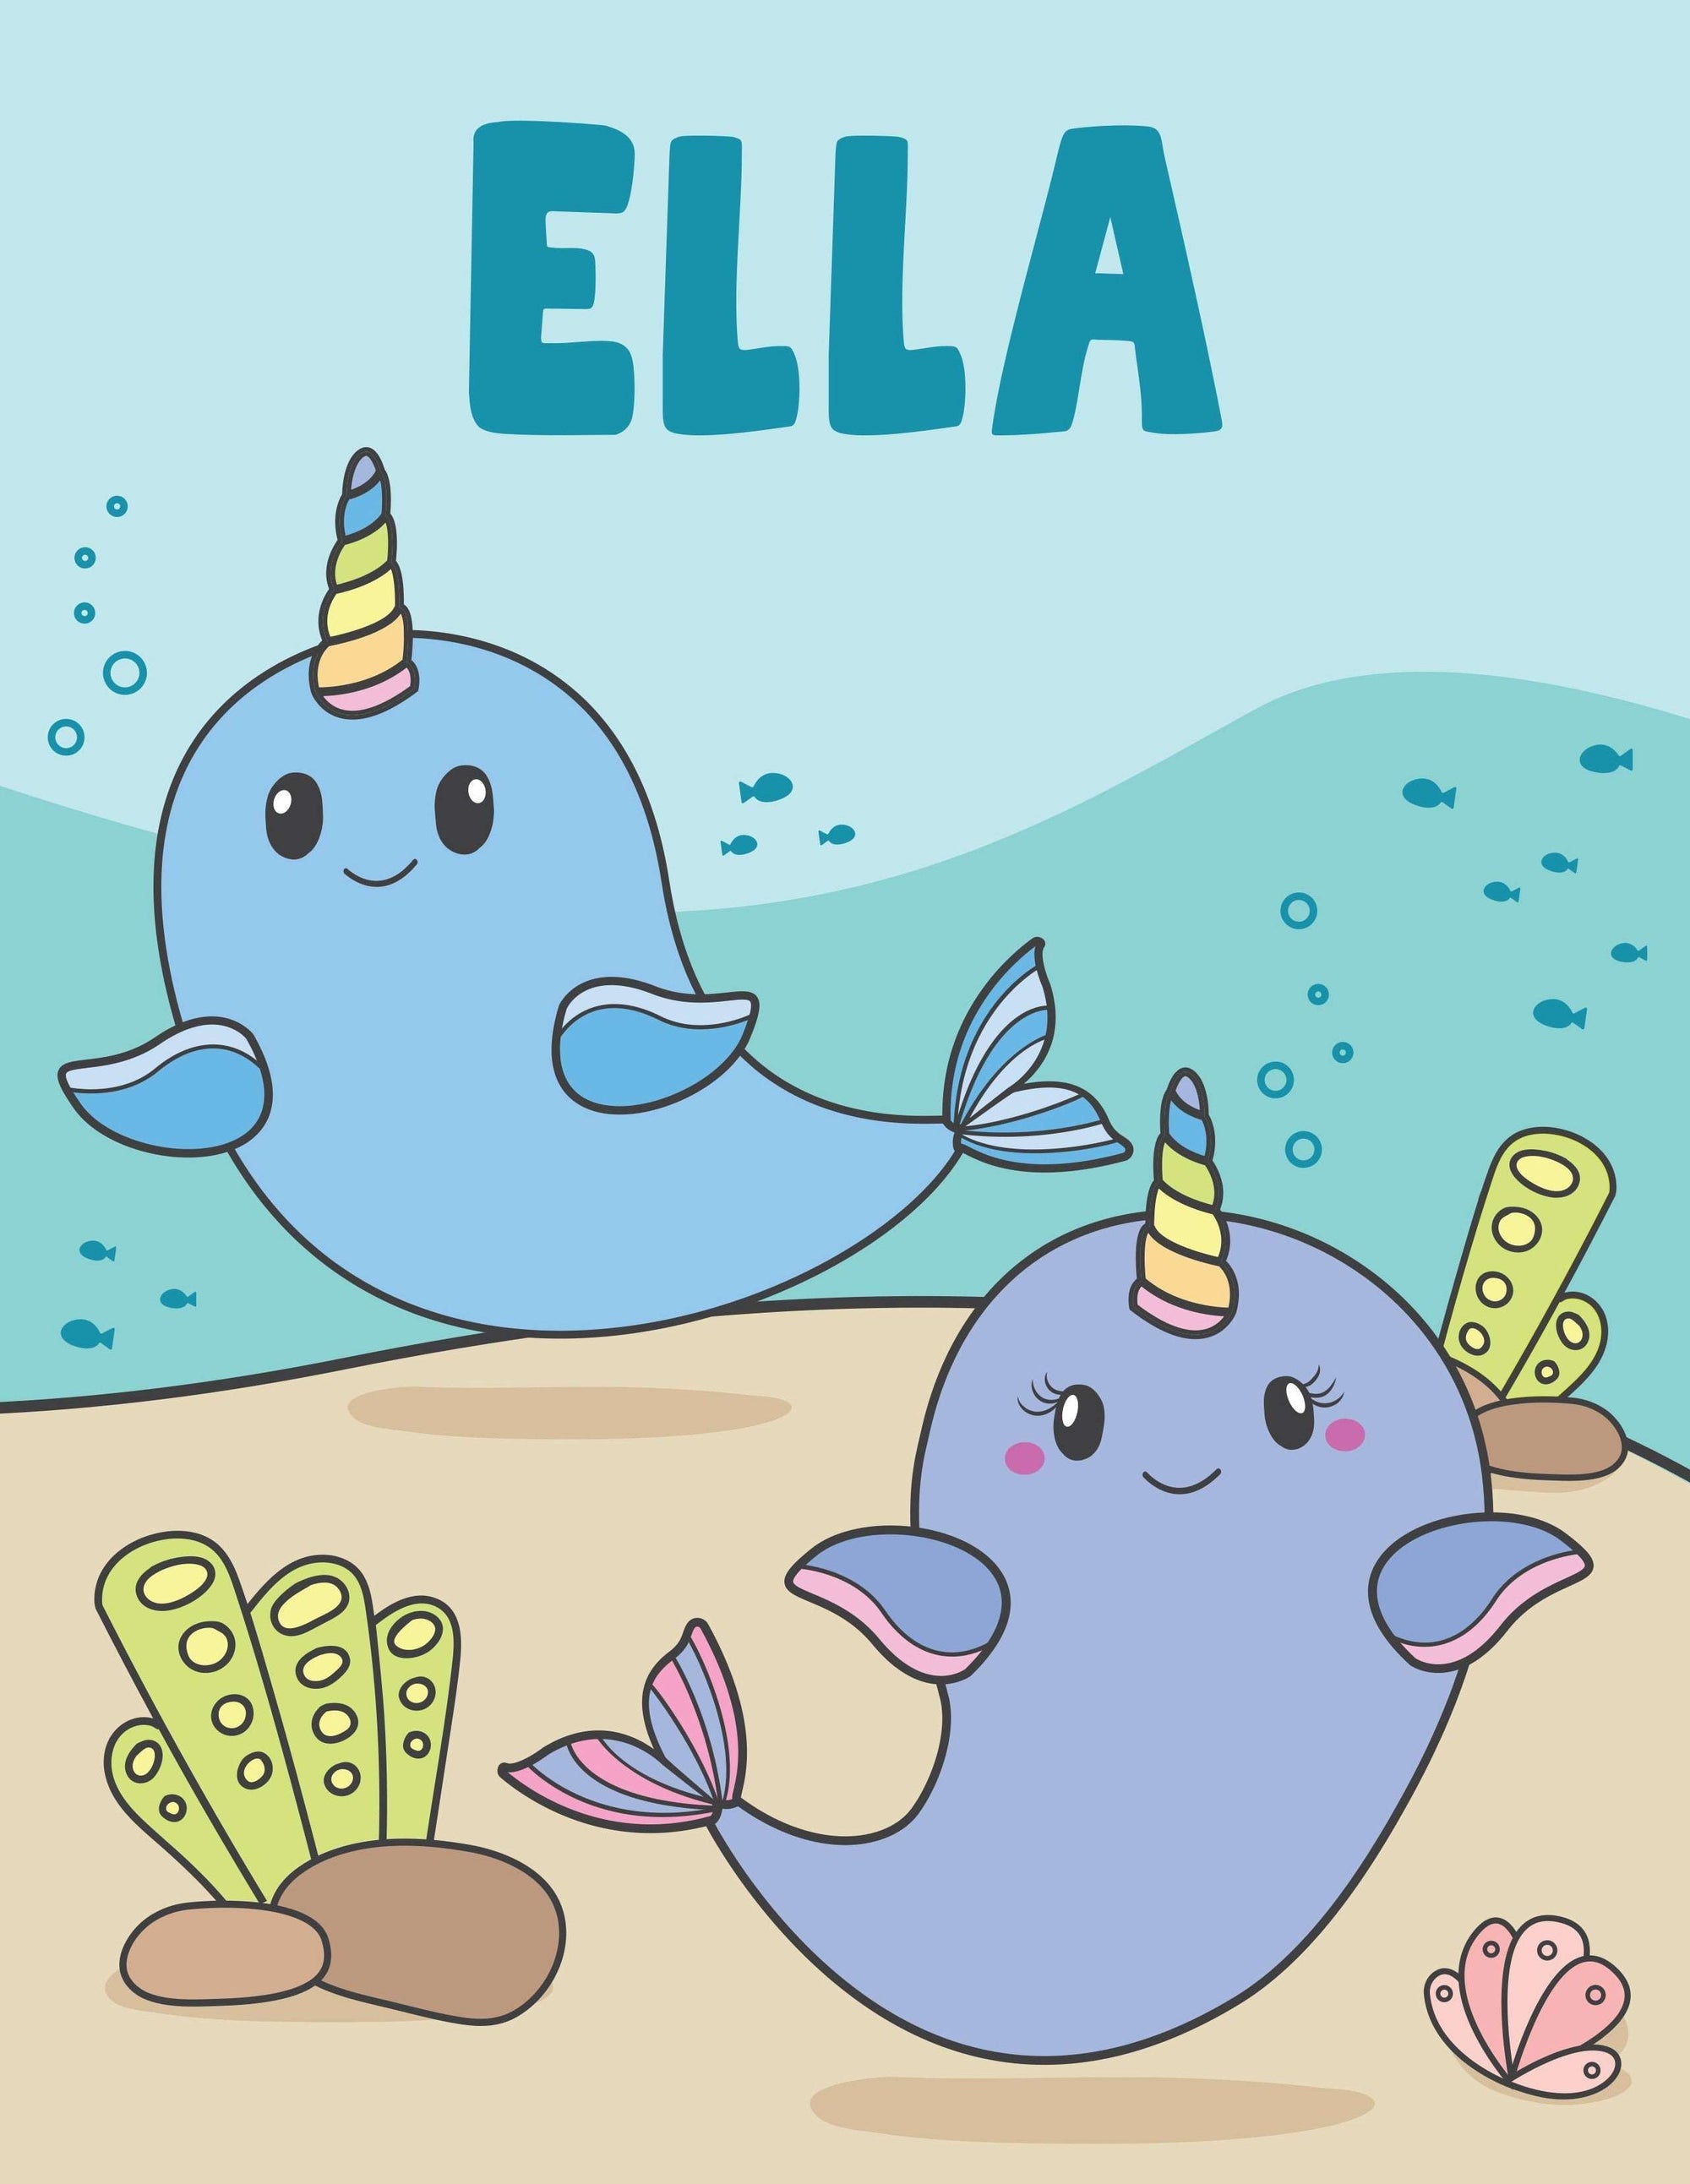 Personalized sketchbook cover with child's name and two narwhals under water.